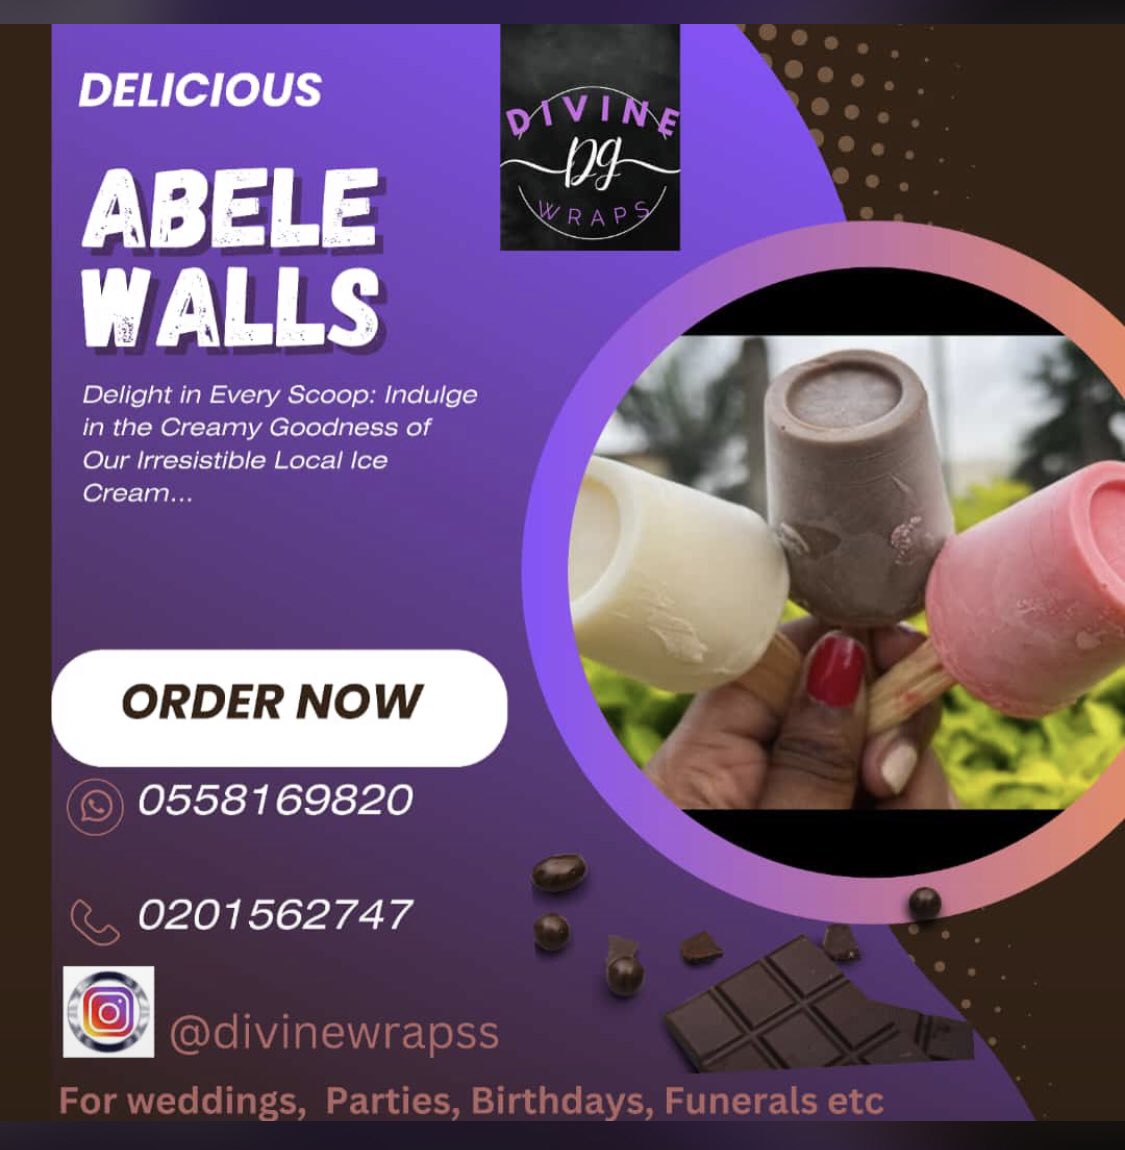 Do you feel for a dessert, Do u have the Hubtel app?, Just go to search engine, key in Abele, select Divine Wrap Abele Walls, select what you want, relax and wait as your delicious abele gets delivered to you in less than 20mins....